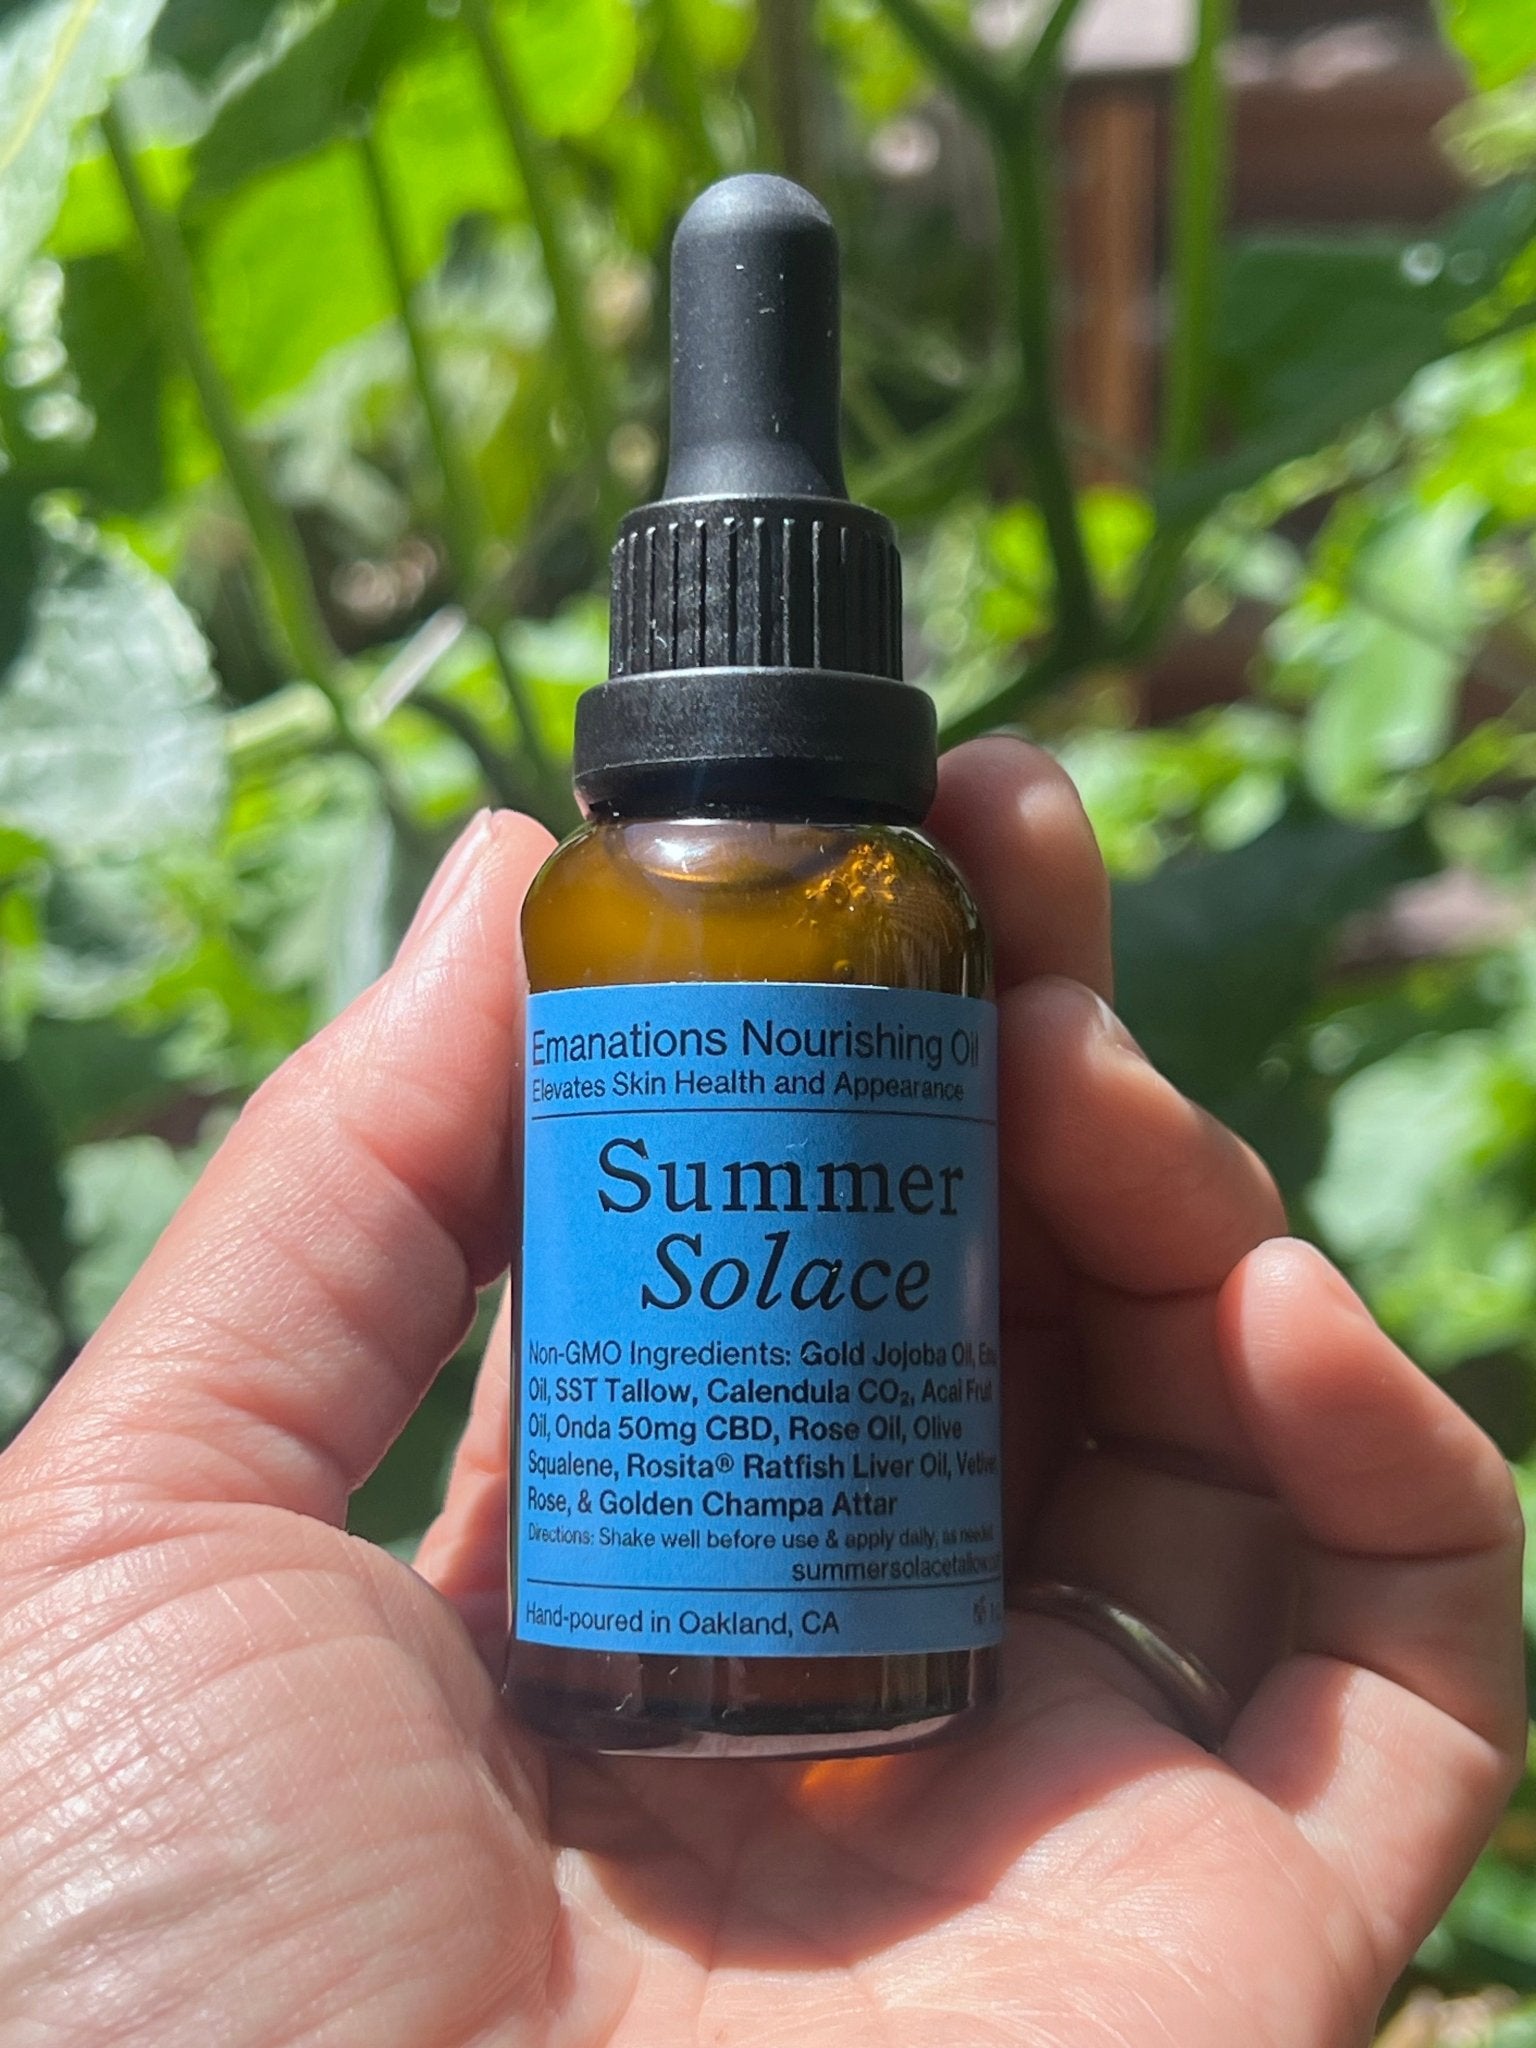 Summer Solace Tallow - Emanations Nourishing Face and Hair Oil - Animal - based - Face and Hair Oil